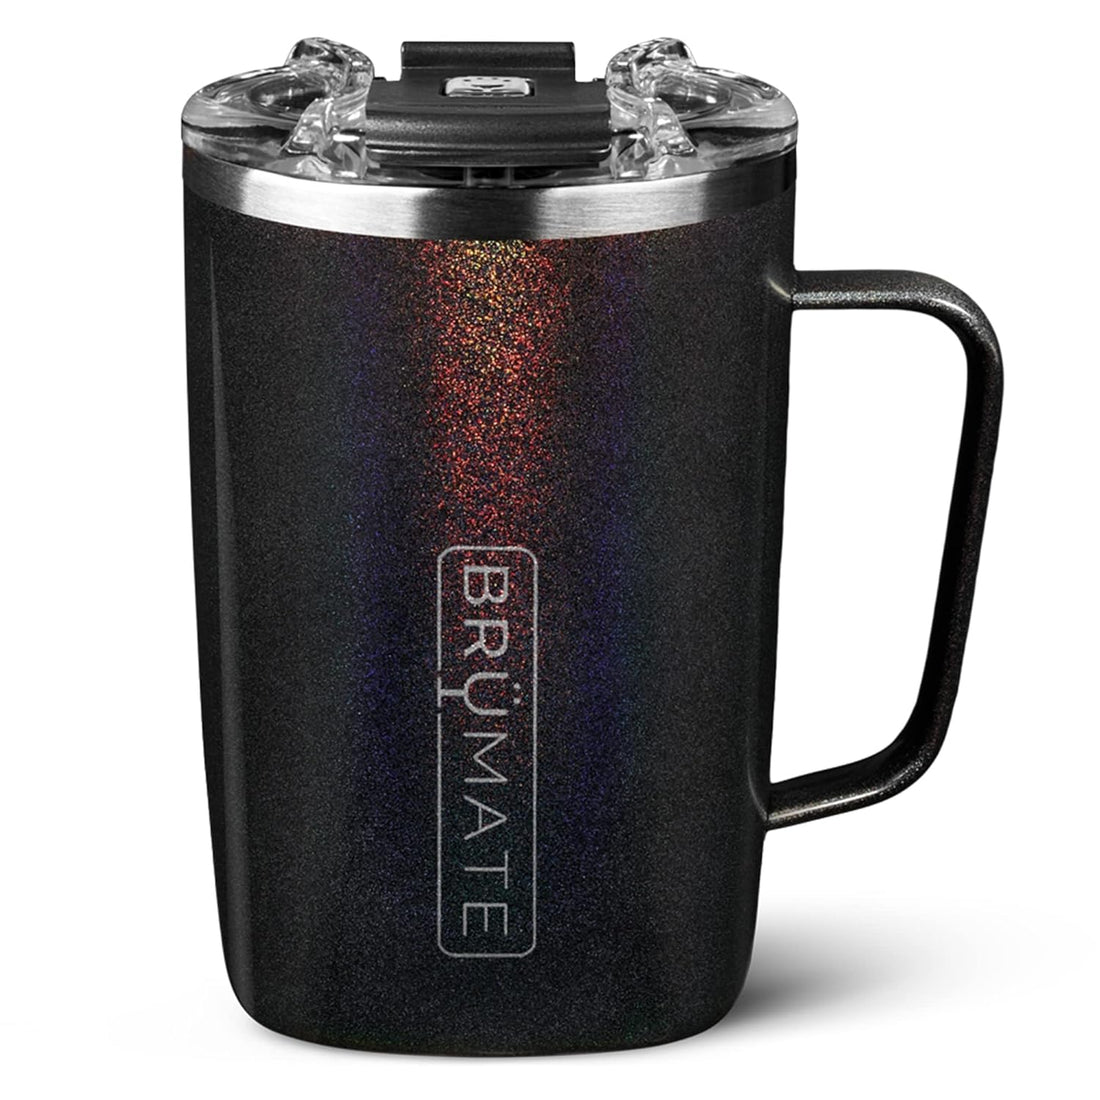 Brumate Toddy - Insulated Coffee Mug with Handle & Lid - 100% Leak-Proof Stainless Steel Coffee Travel Mug - Double Walled Coffee Cup - Glitter Charcoal